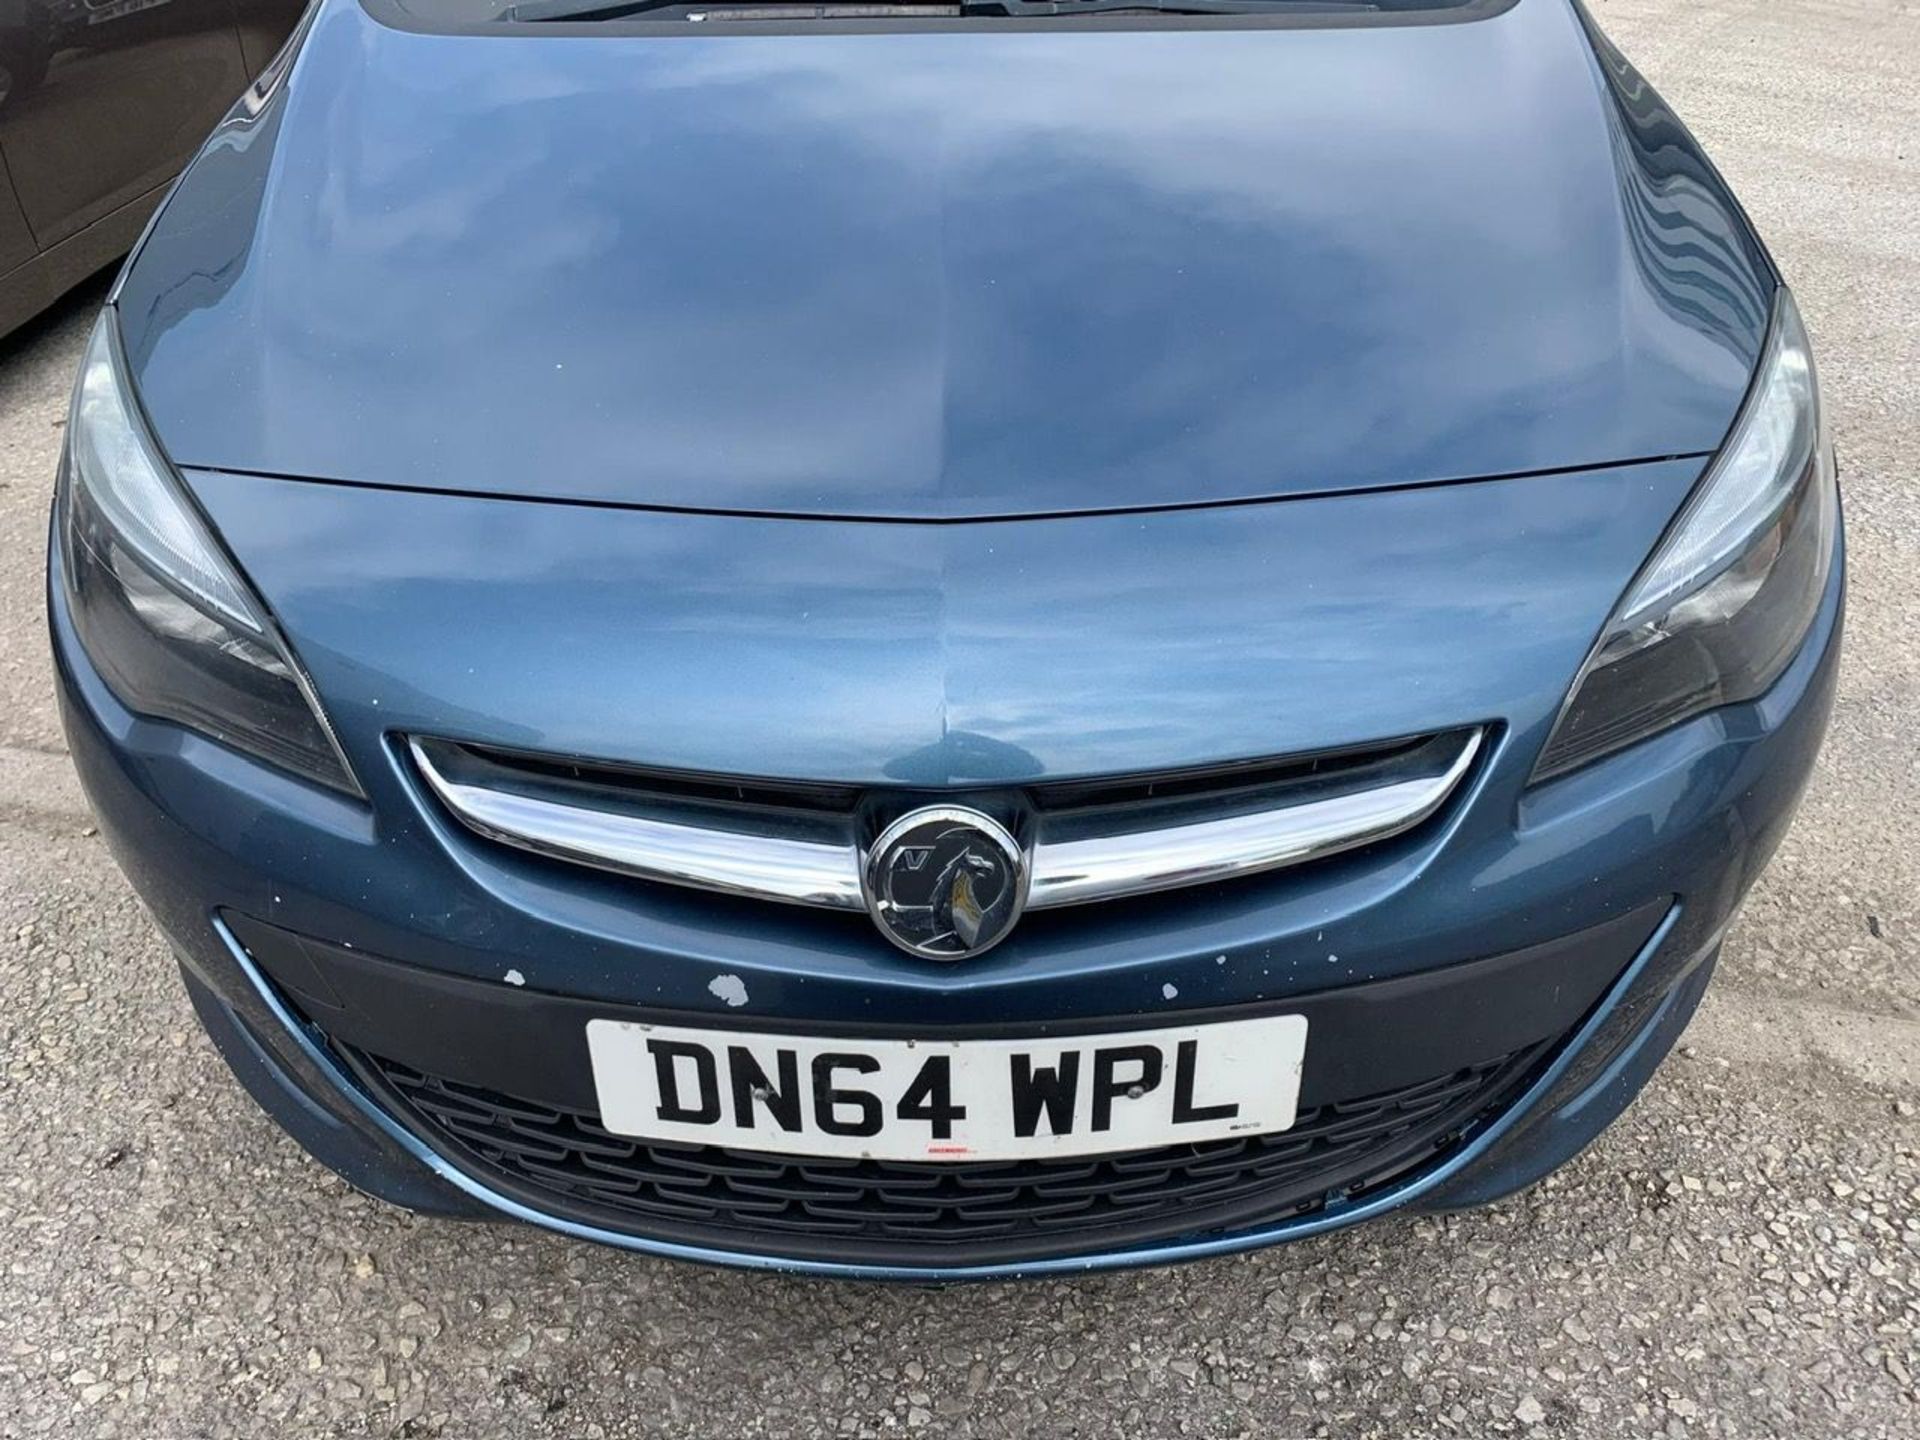 DN64 WPL VAUXHALL ASTRA  BLUE PETROL Mot: 21.02.25 First Registration: 31.12.14 2 Owners Last - Image 3 of 11